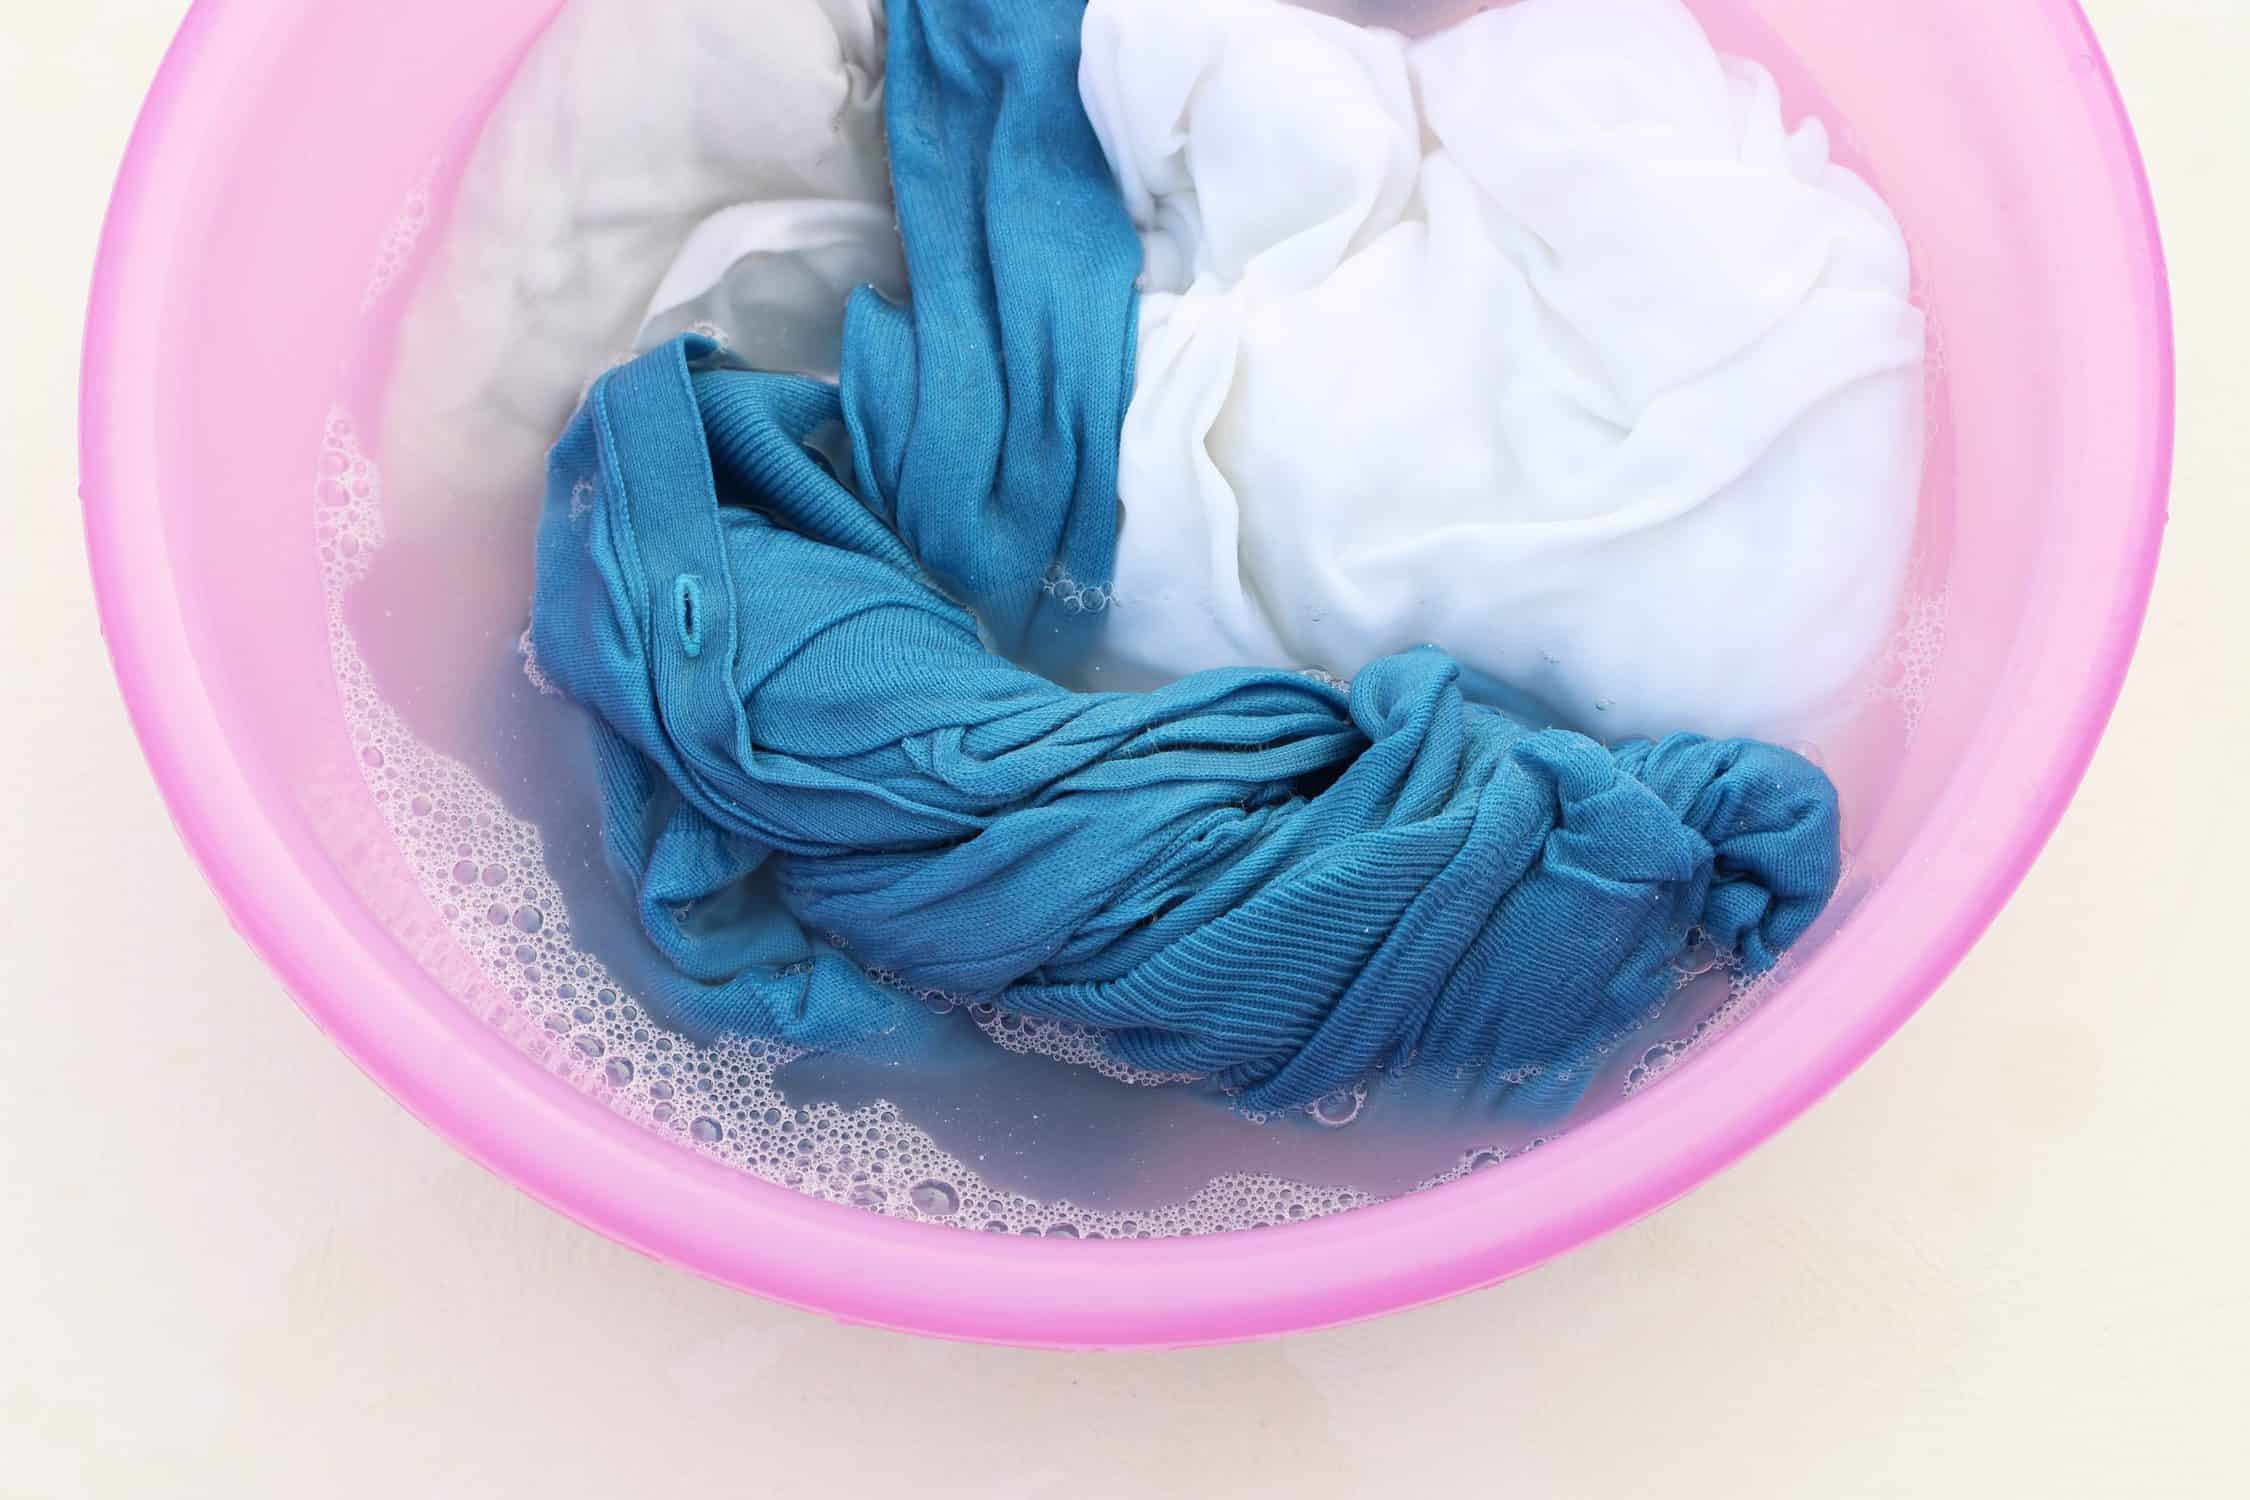 scrubs soaking in cold water to remove stains